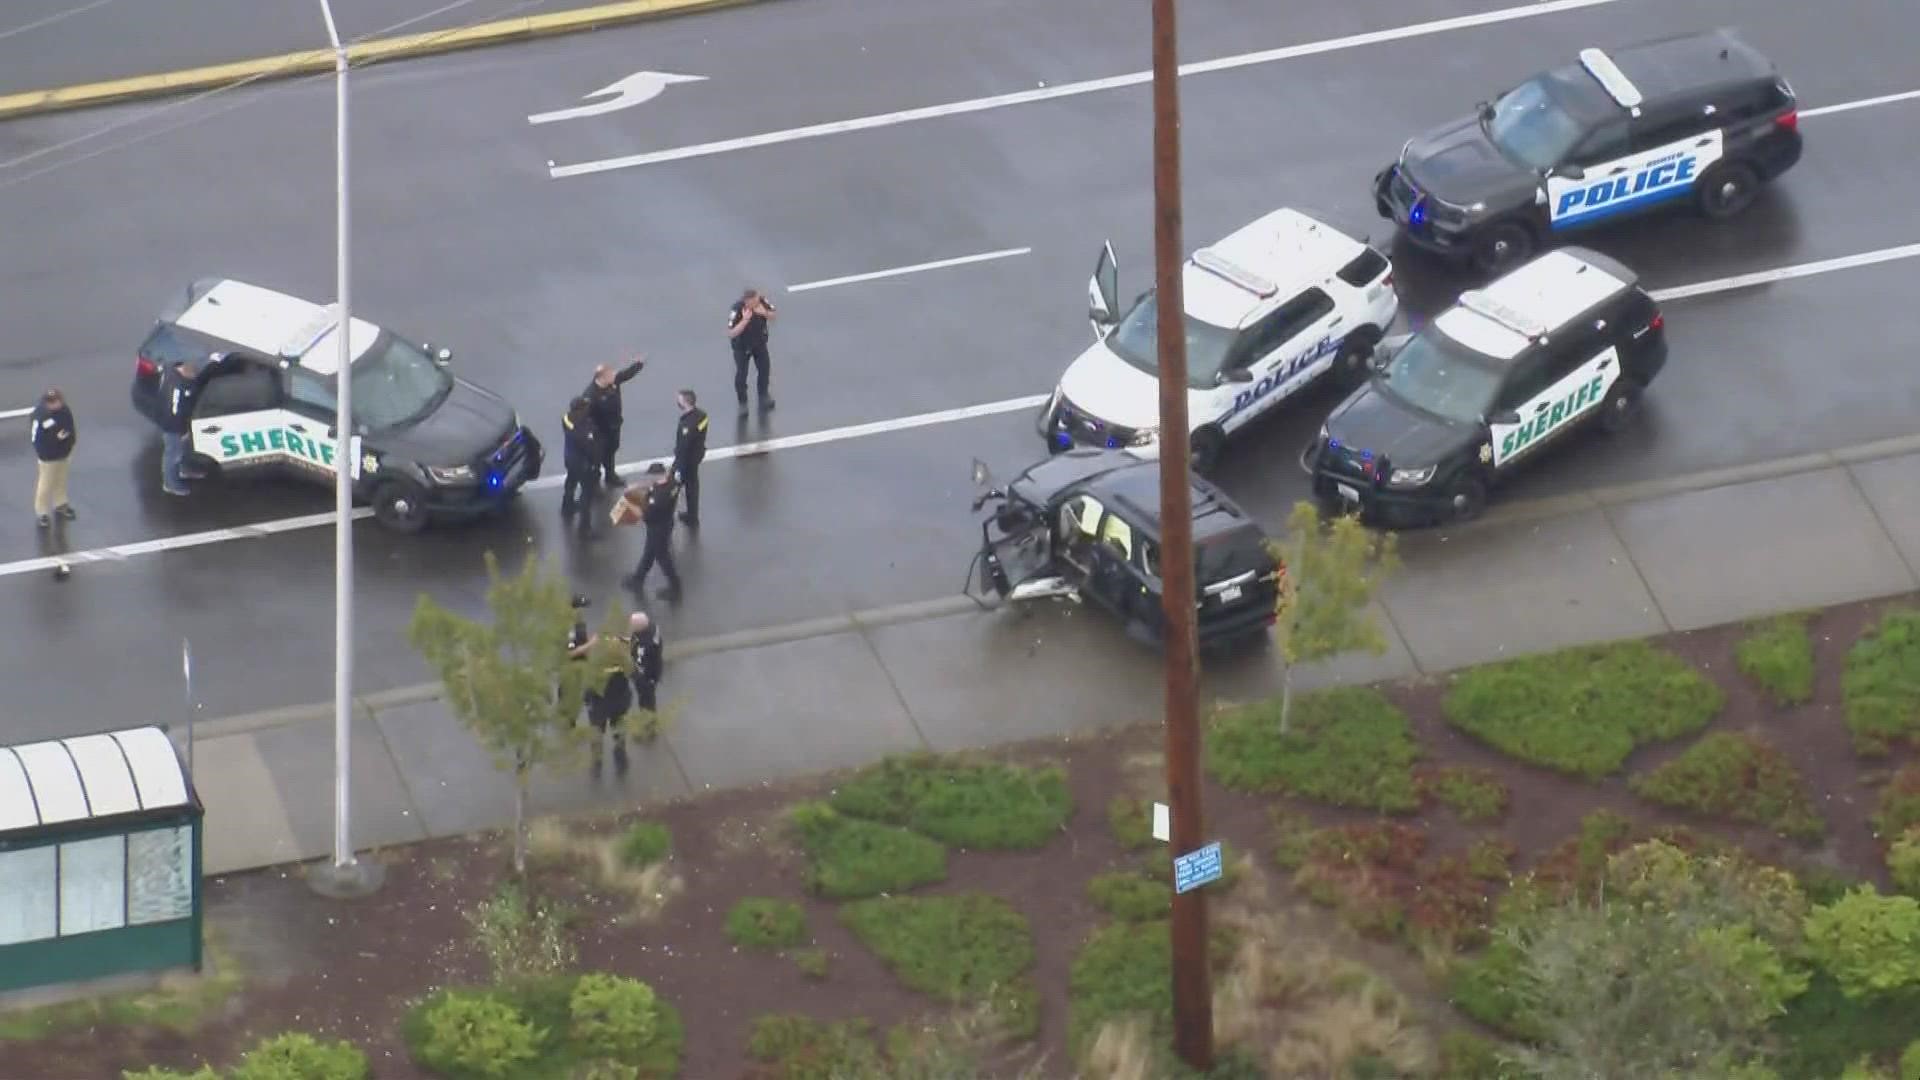 The suspect led police on a chase from SeaTac to just outside of Kent in south King County.